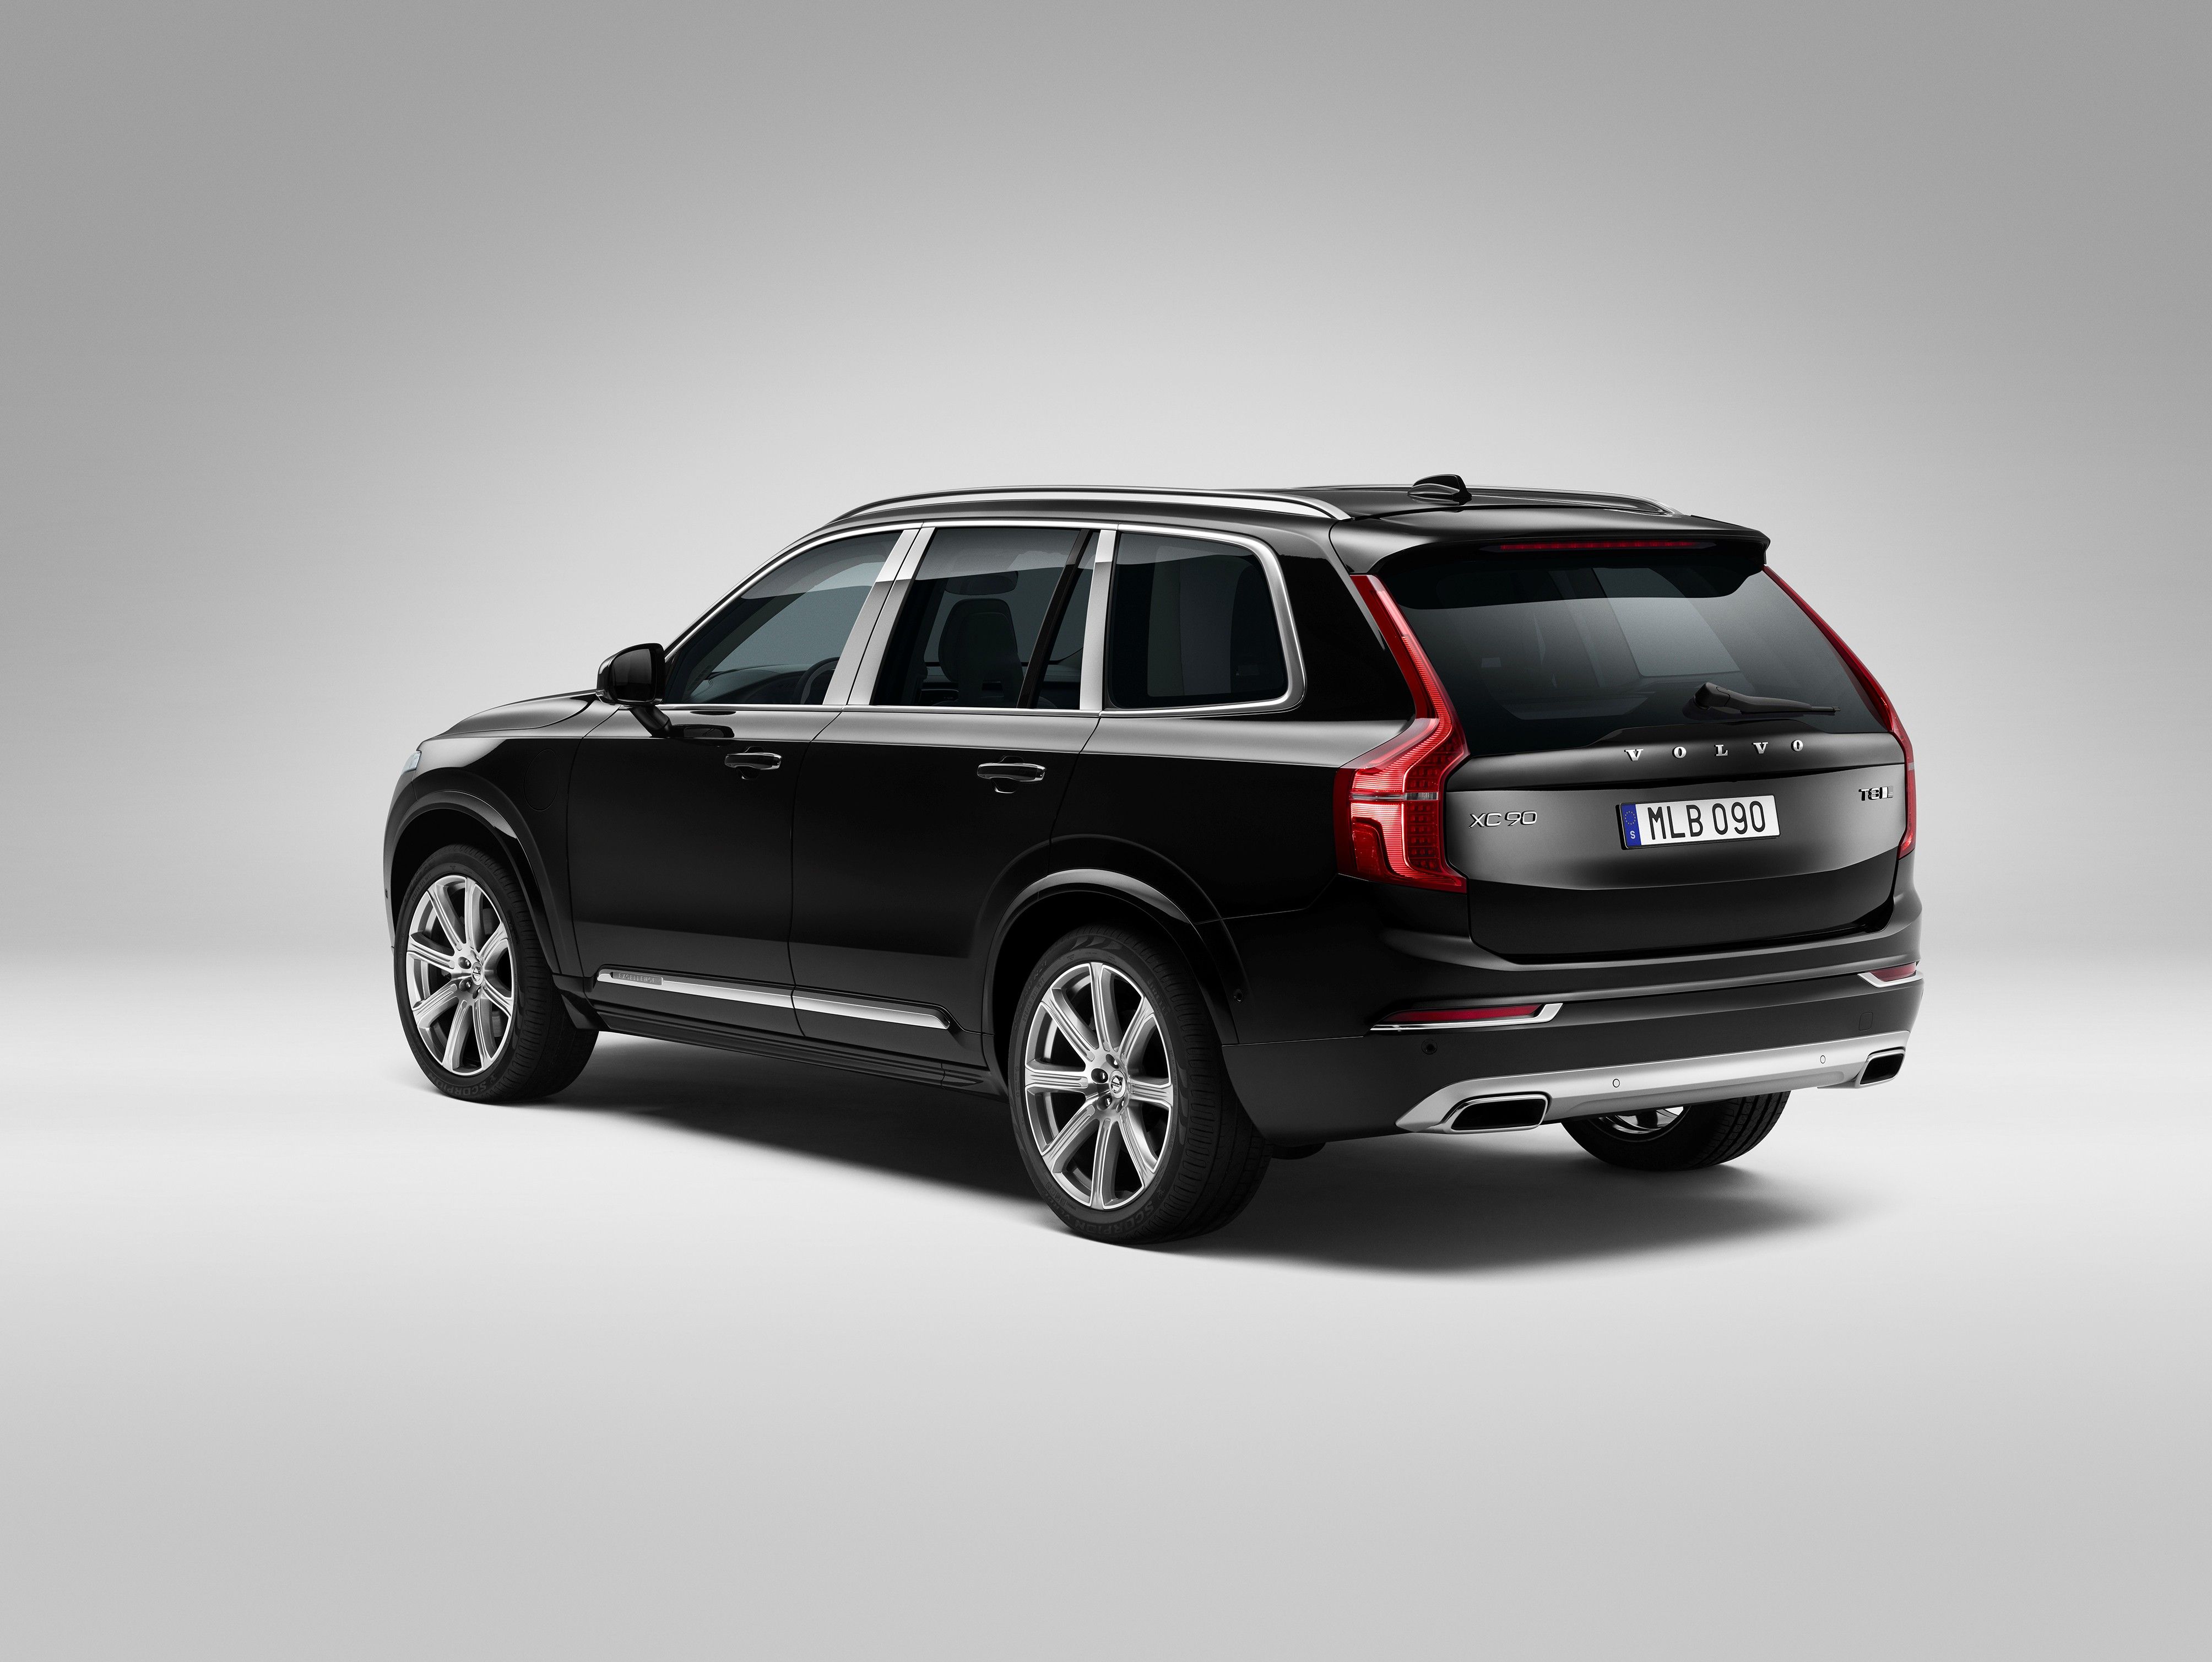 A Volvo you can subscribe to named an Autotrader Best New Car for